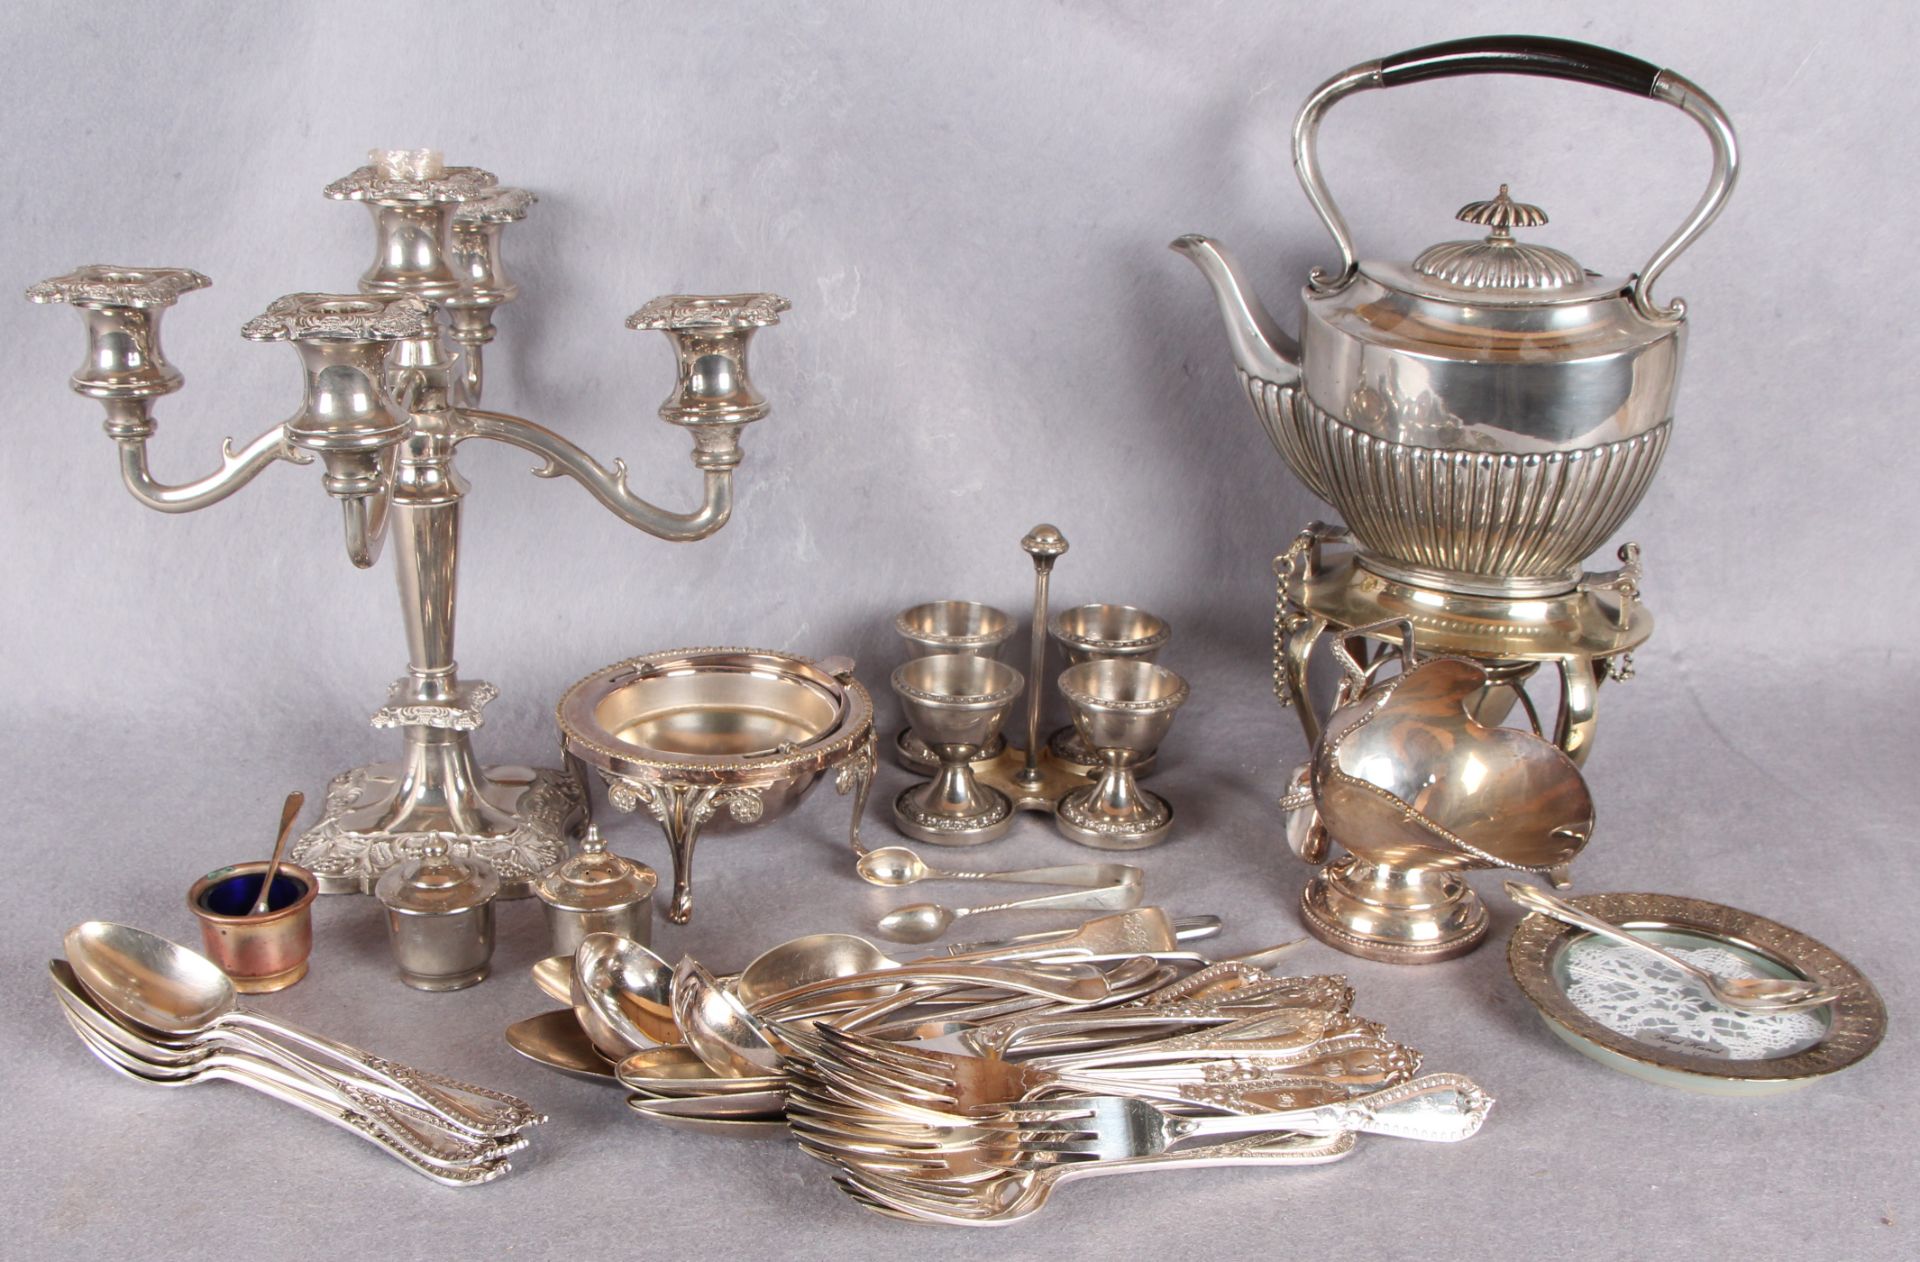 Plated wares including a spirit kettle with stand and burner,